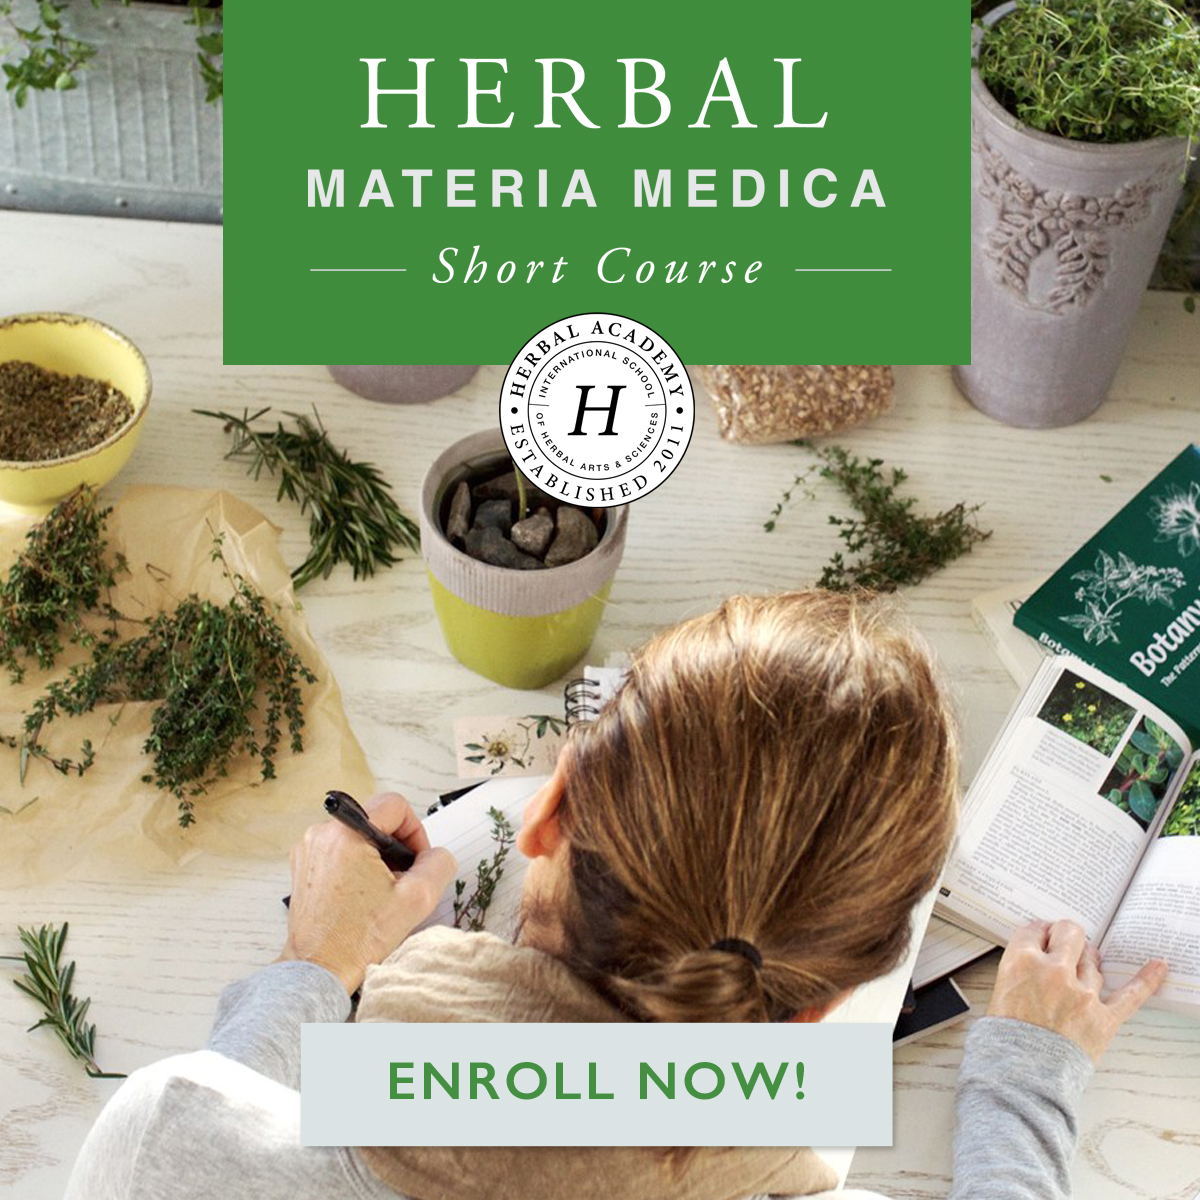 How To Create An Herbal Materia Medica (Free E-Course) | Herbal Academy | One part of learning to be an herbalist is learning about the herbs themselves. Our new Herbal Materia Medica Course can help make learning one herb at a time much easier. Check it out today!